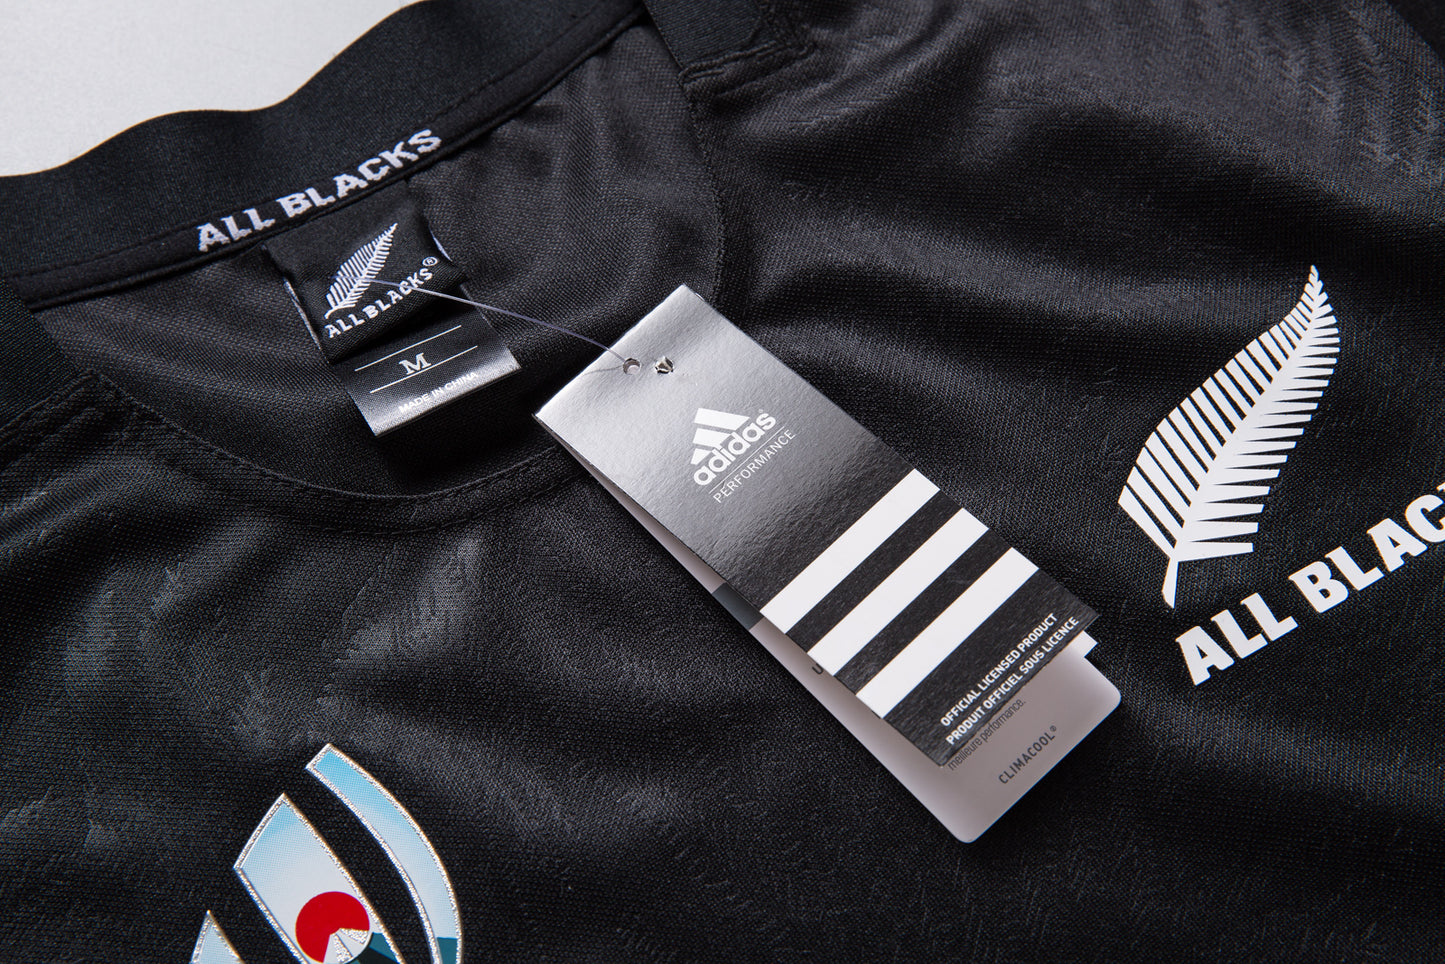 ALL black Word Cup home jerseys